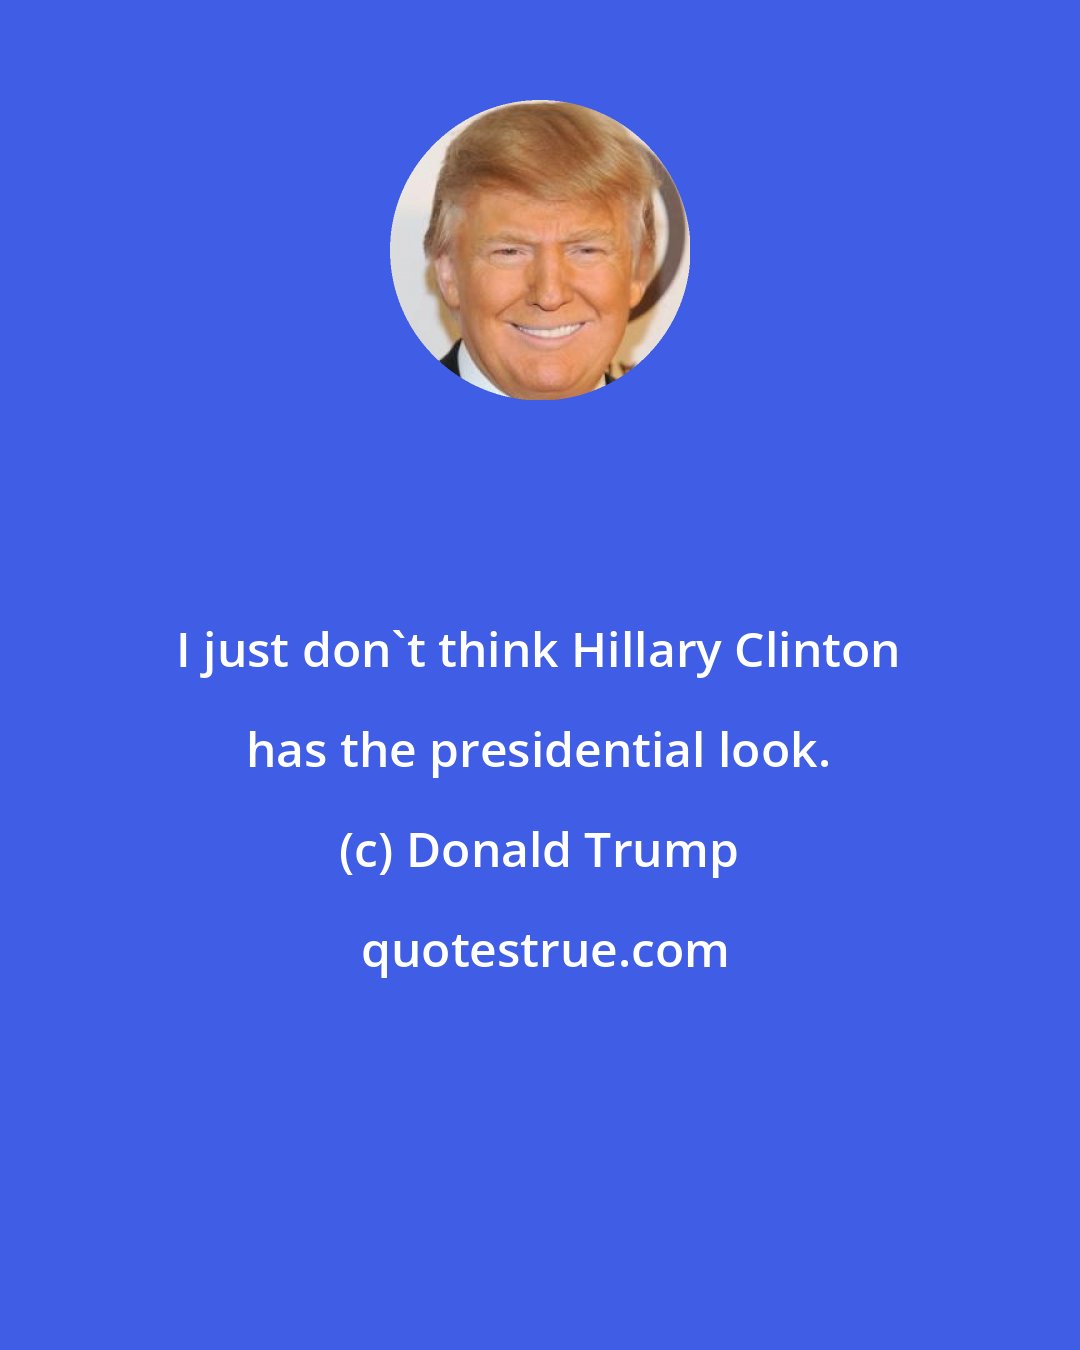 Donald Trump: I just don't think Hillary Clinton has the presidential look.